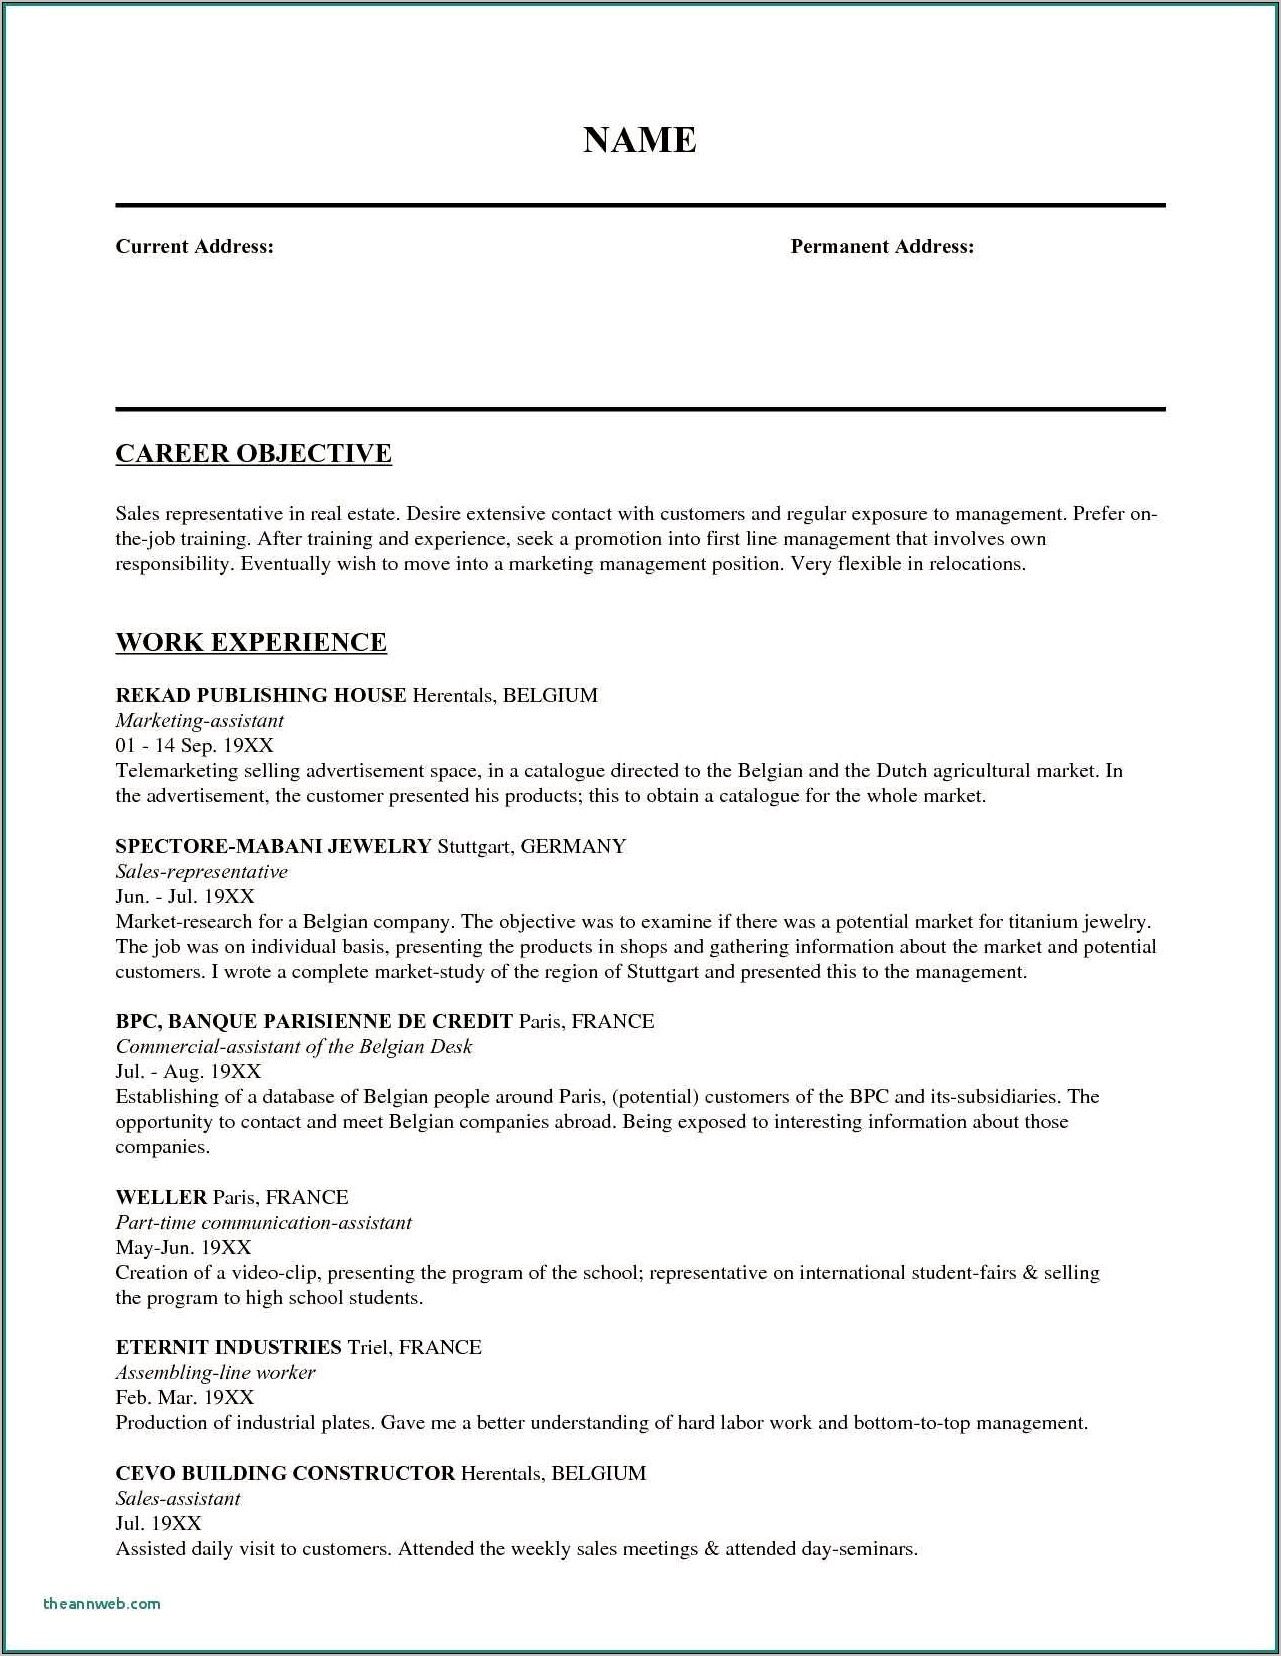 Resume Objectives Sample For Abroad